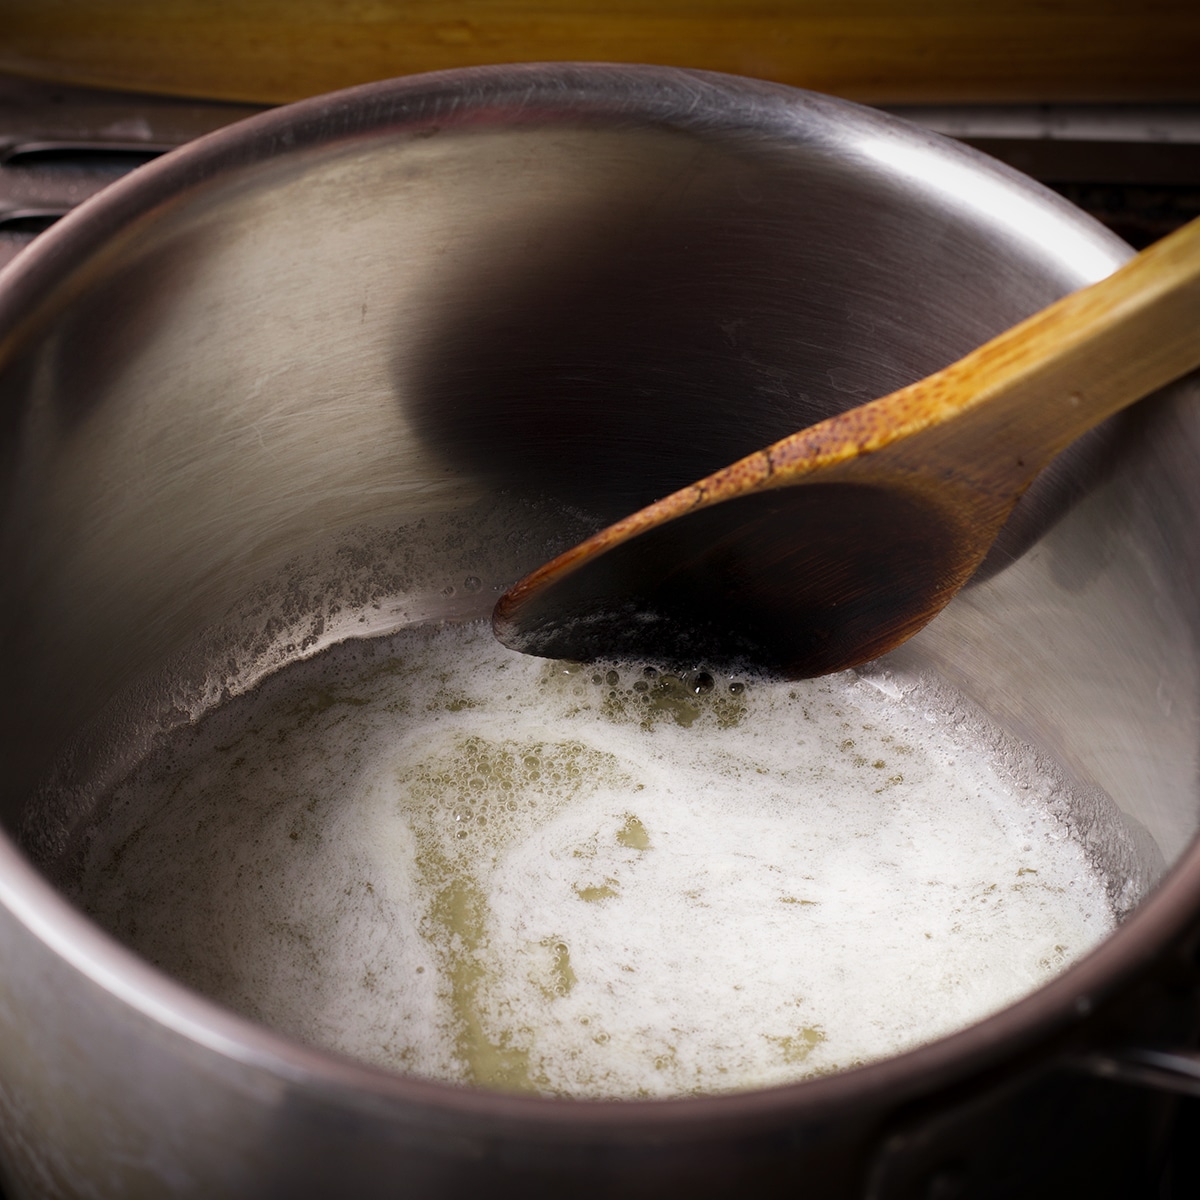 Melting butter in a saucepan on the stovetop.